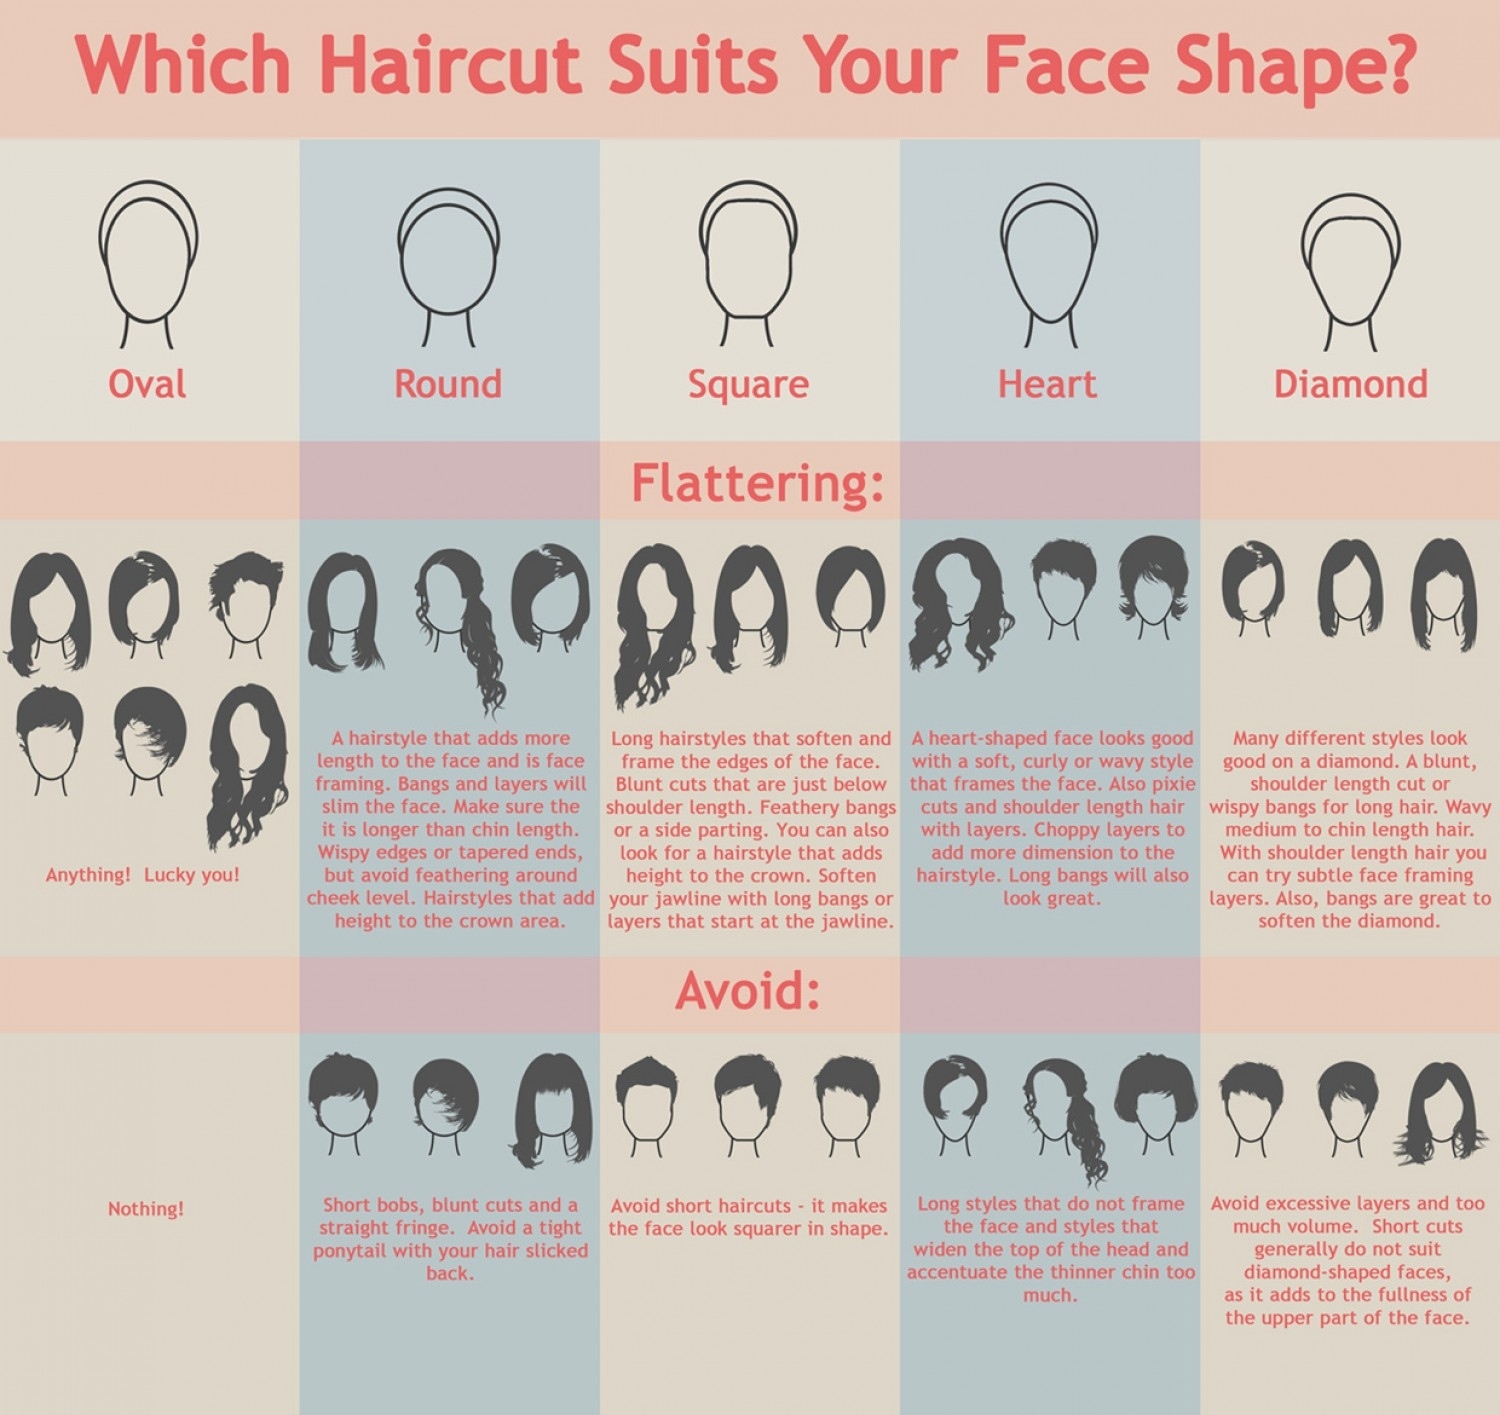 Which Haircut Suits Your Face Shape? | Visual.ly regarding Hairstyles To Fit My Face